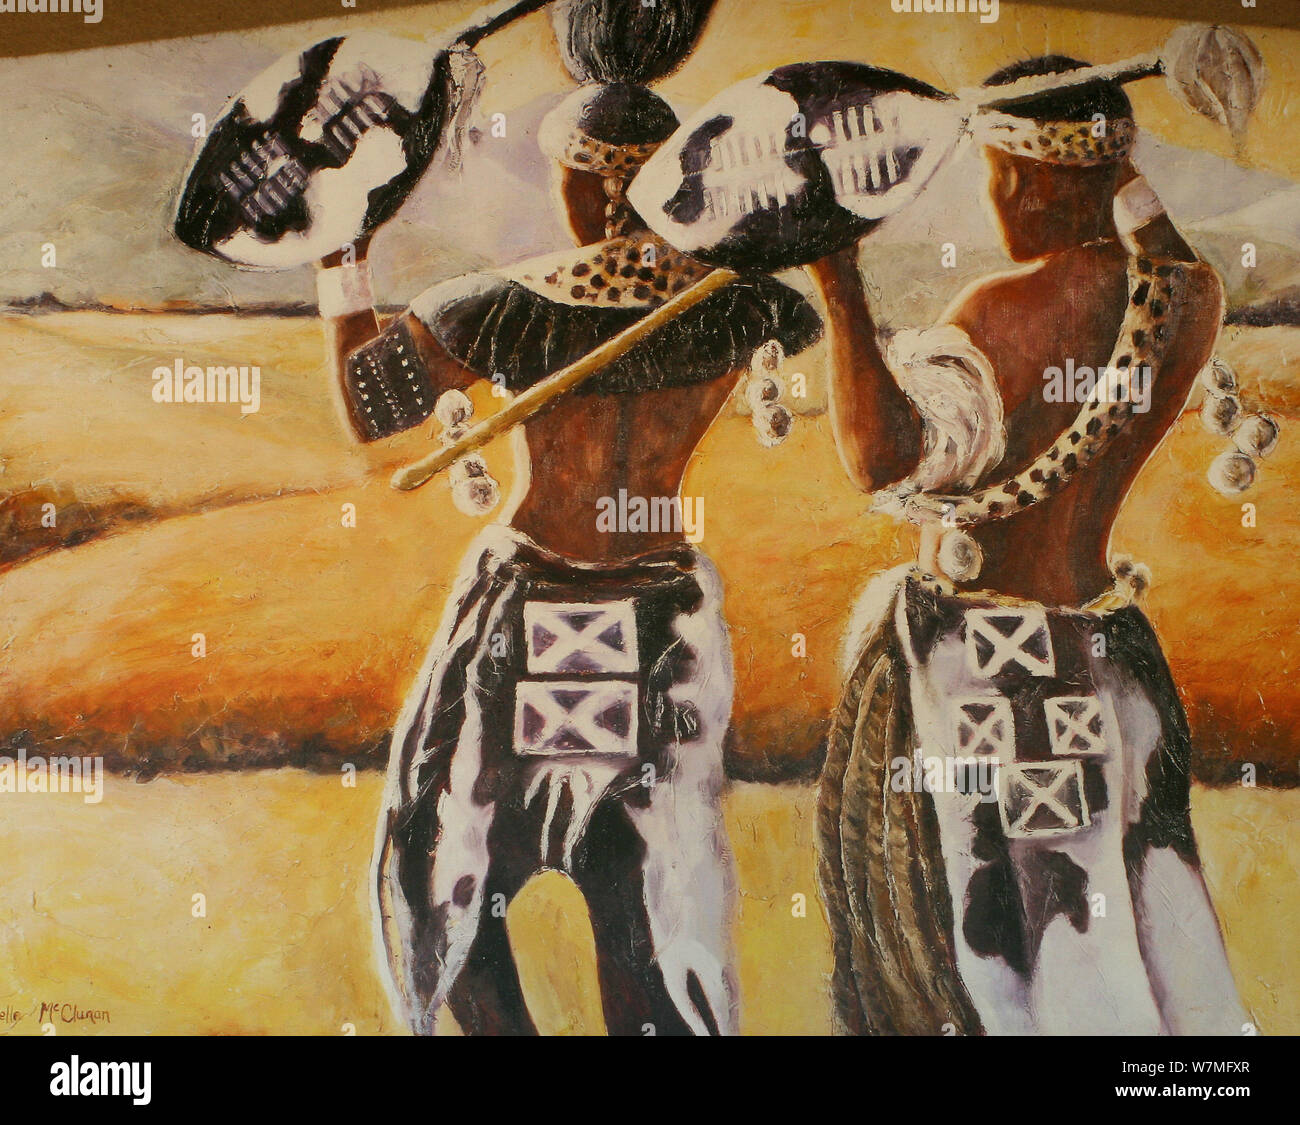 Painting depicting a Zulu proposal of marriage down by the river at Shakaland Zulu Cultural Village, Eshowe, Kwazulu Natal, South Africa Stock Photo